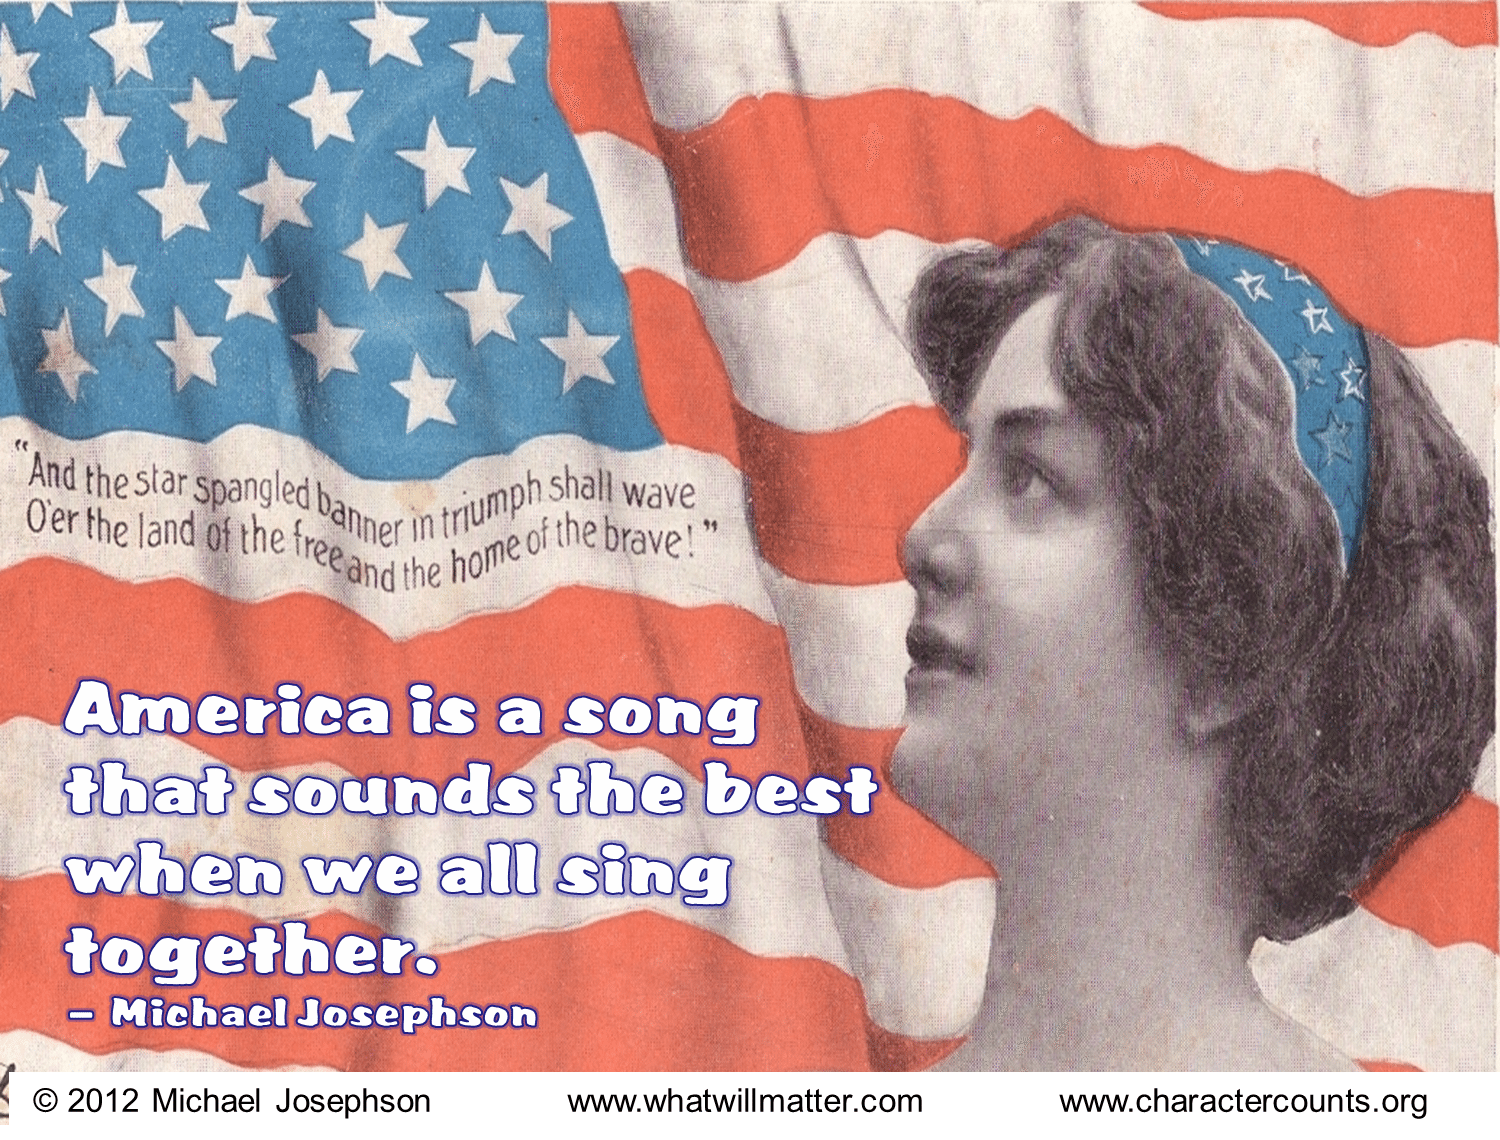 America is beautiful. Who is America Постер. America America Song. Patriotism in America. America is a Tune it must be Sung together.